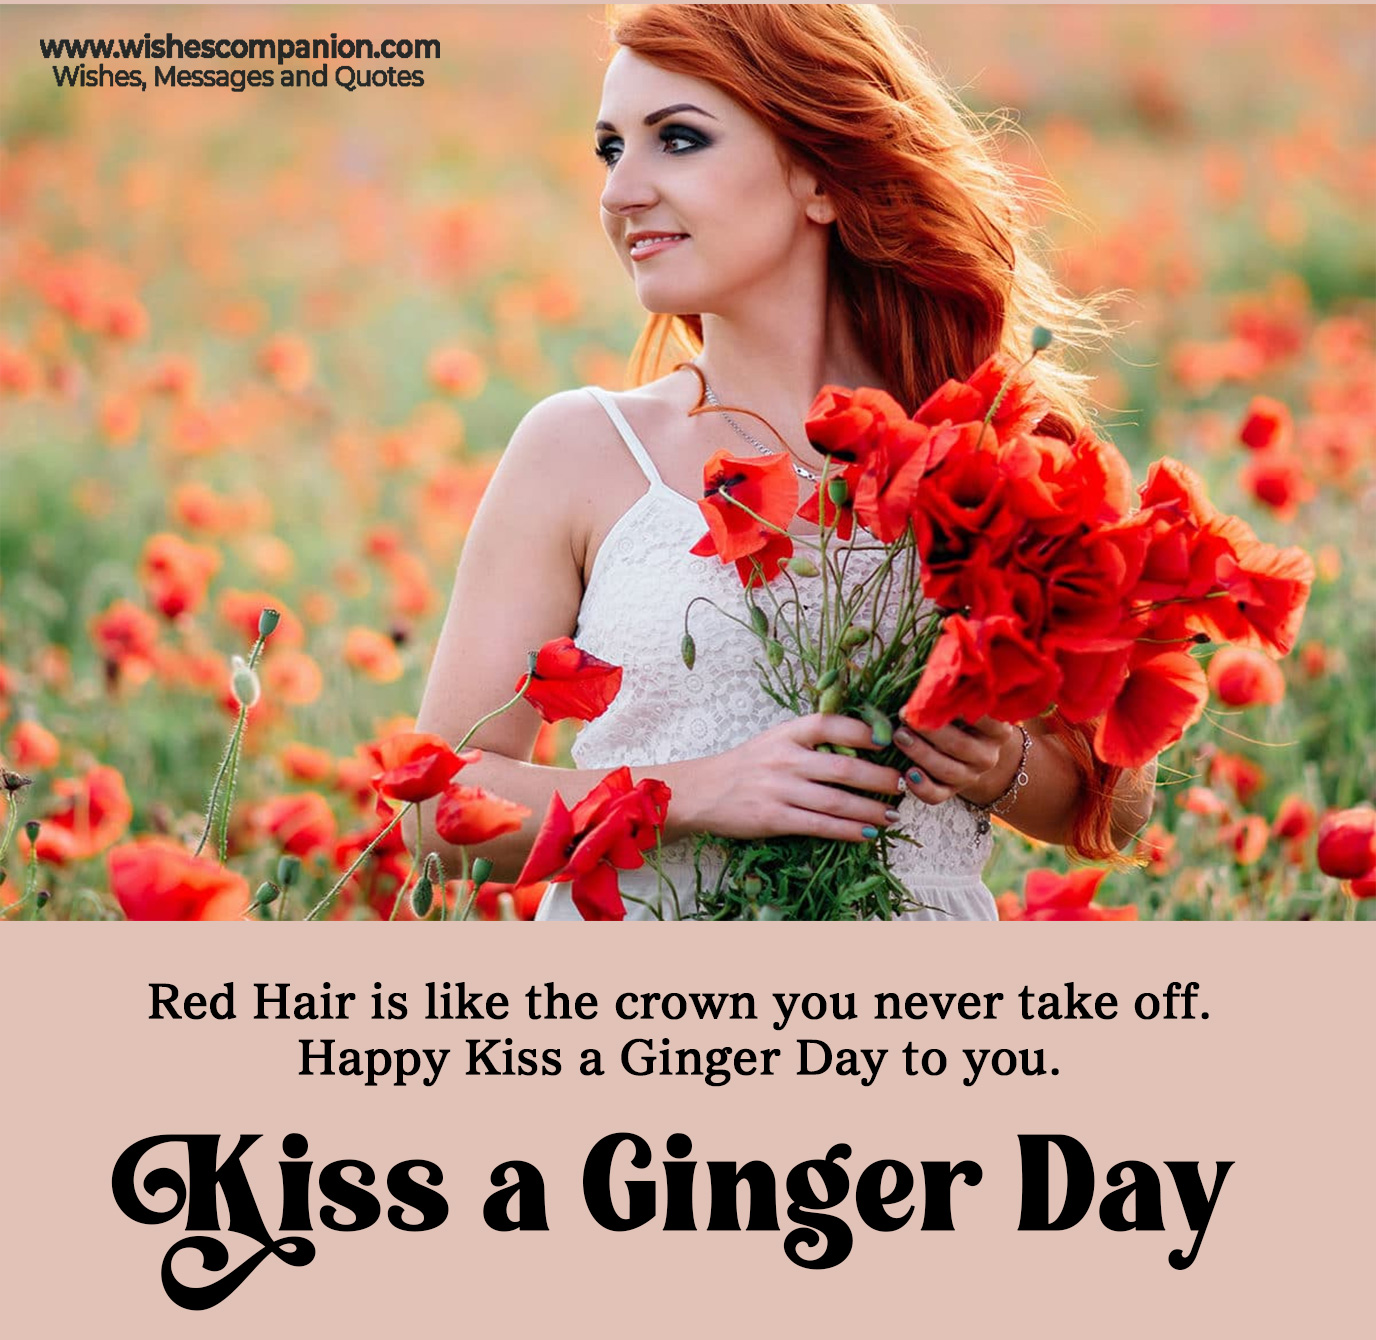 National Kiss a Ginger Day